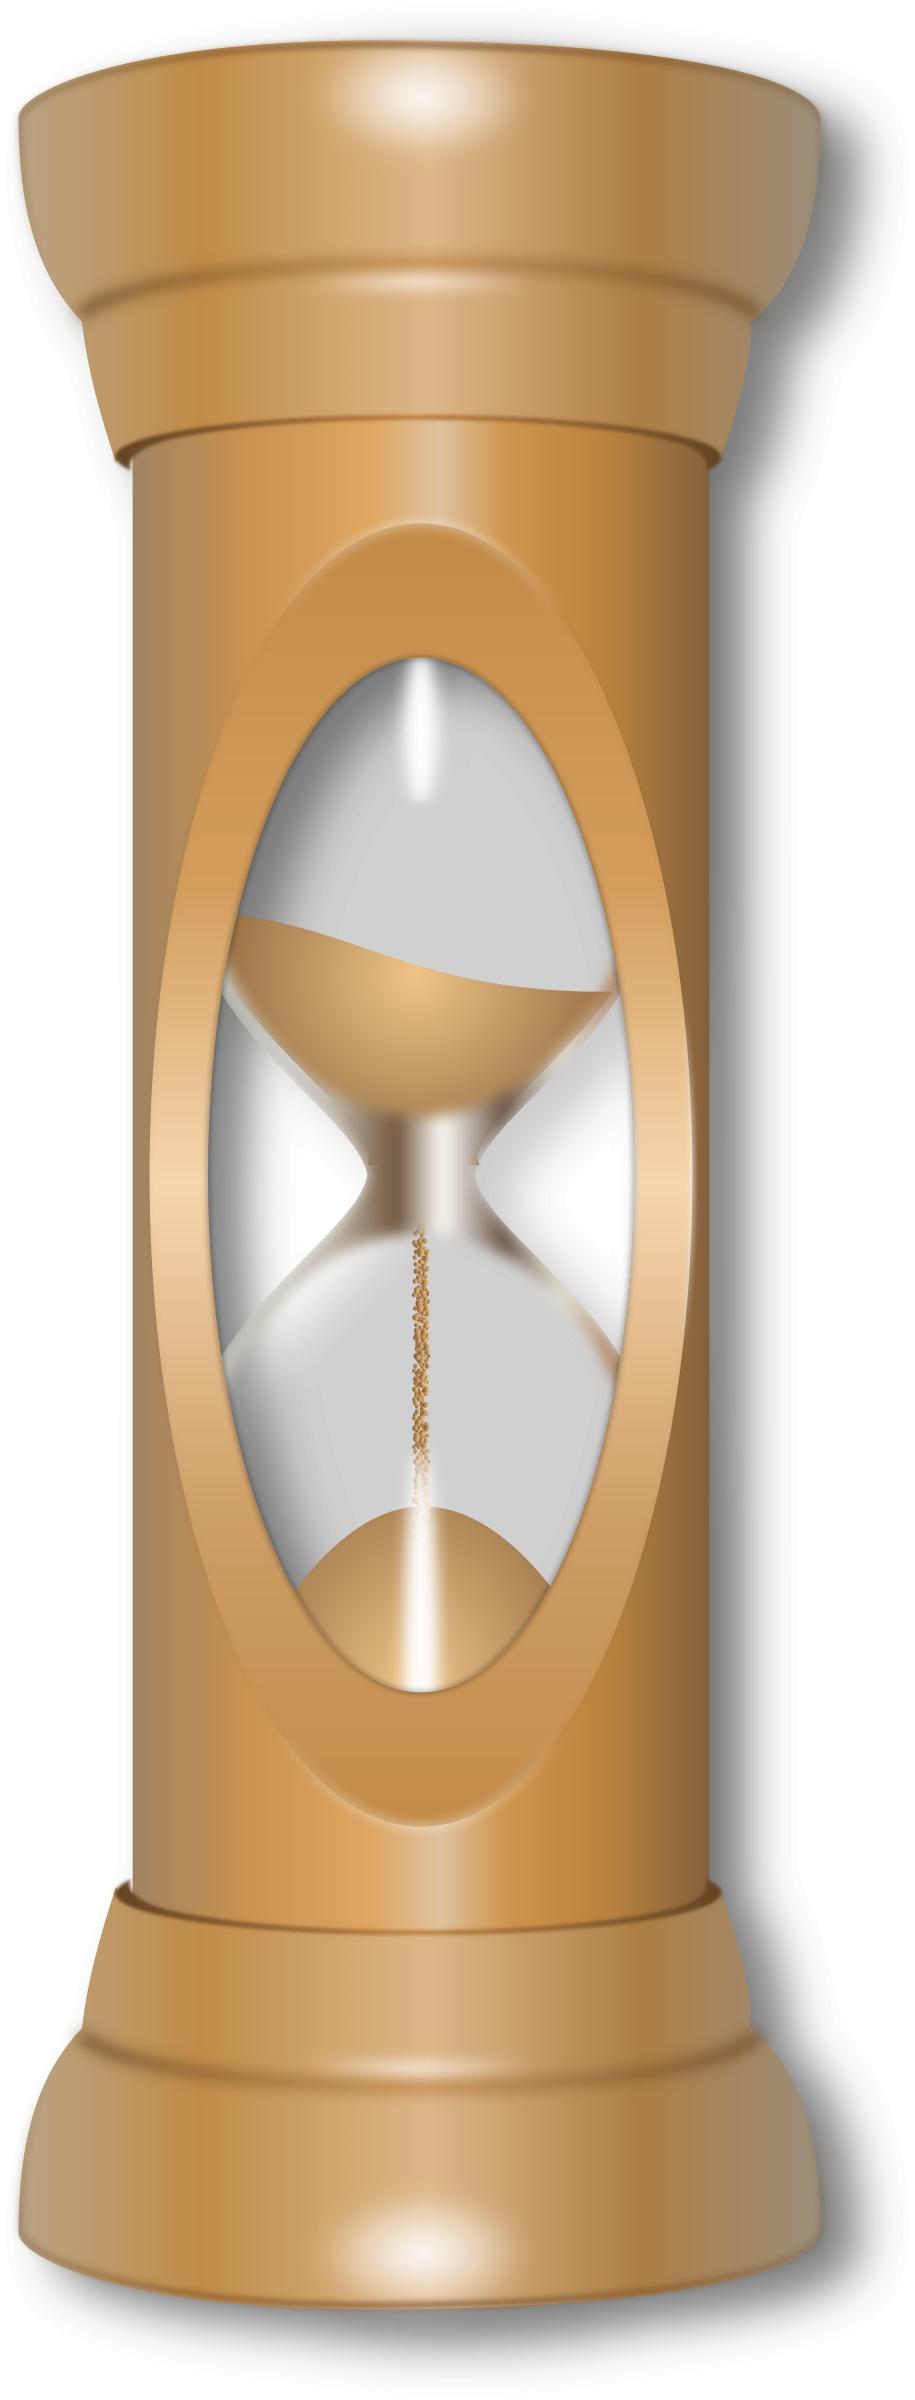 Hourglass png